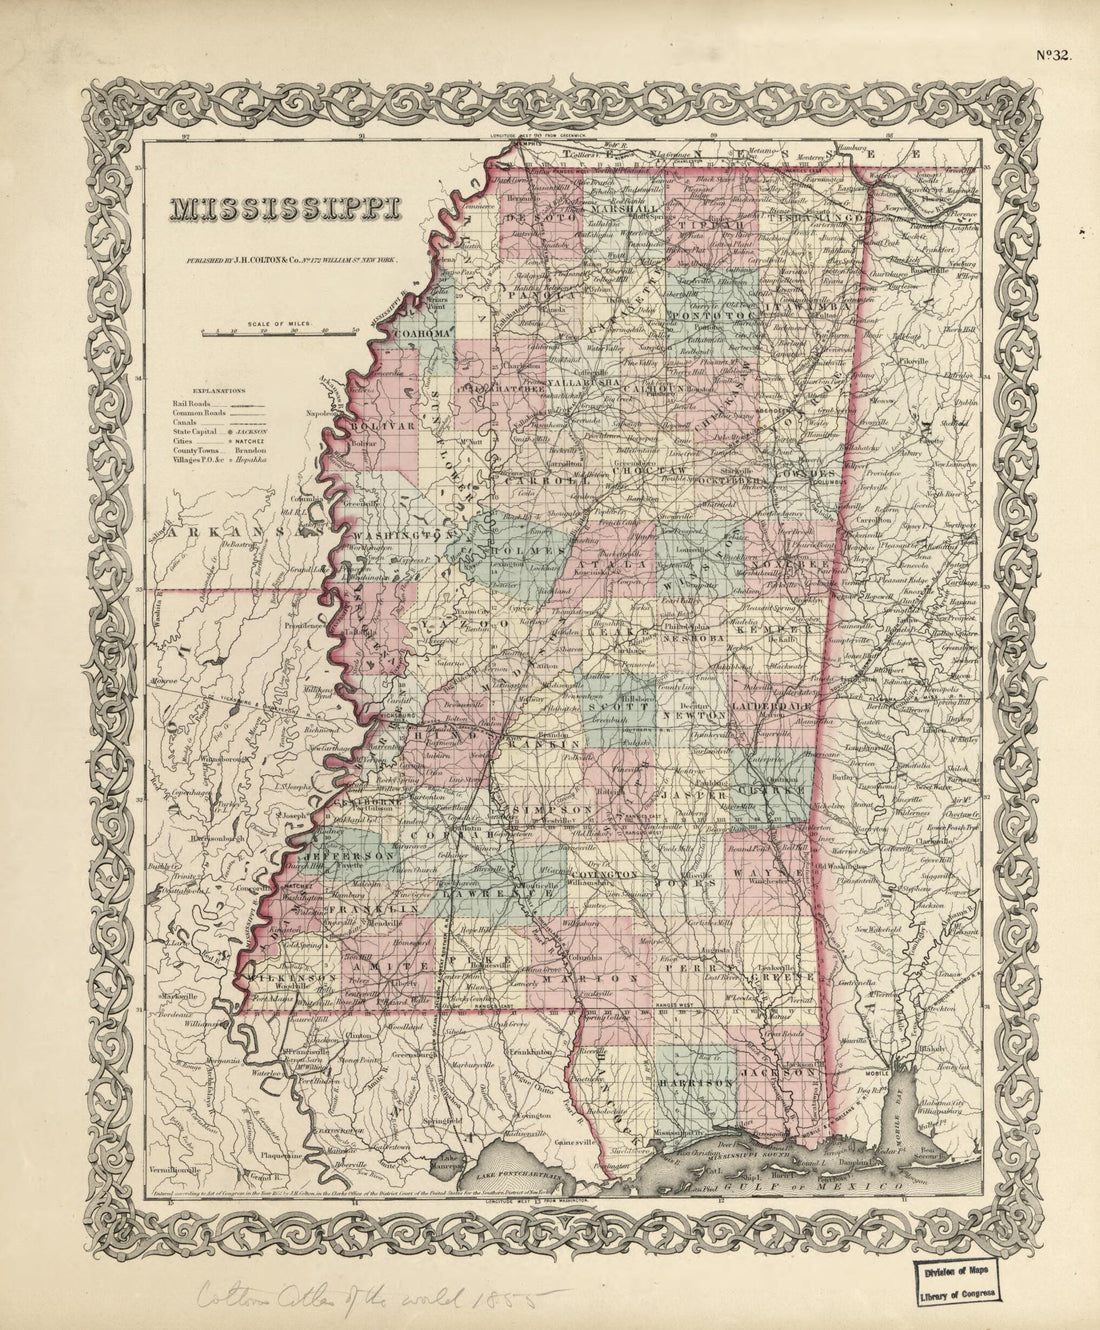 This old map of Mississippi from 1855 was created by G. Woolworth (George Woolworth) Colton,  J.H. Colton &amp; Co in 1855